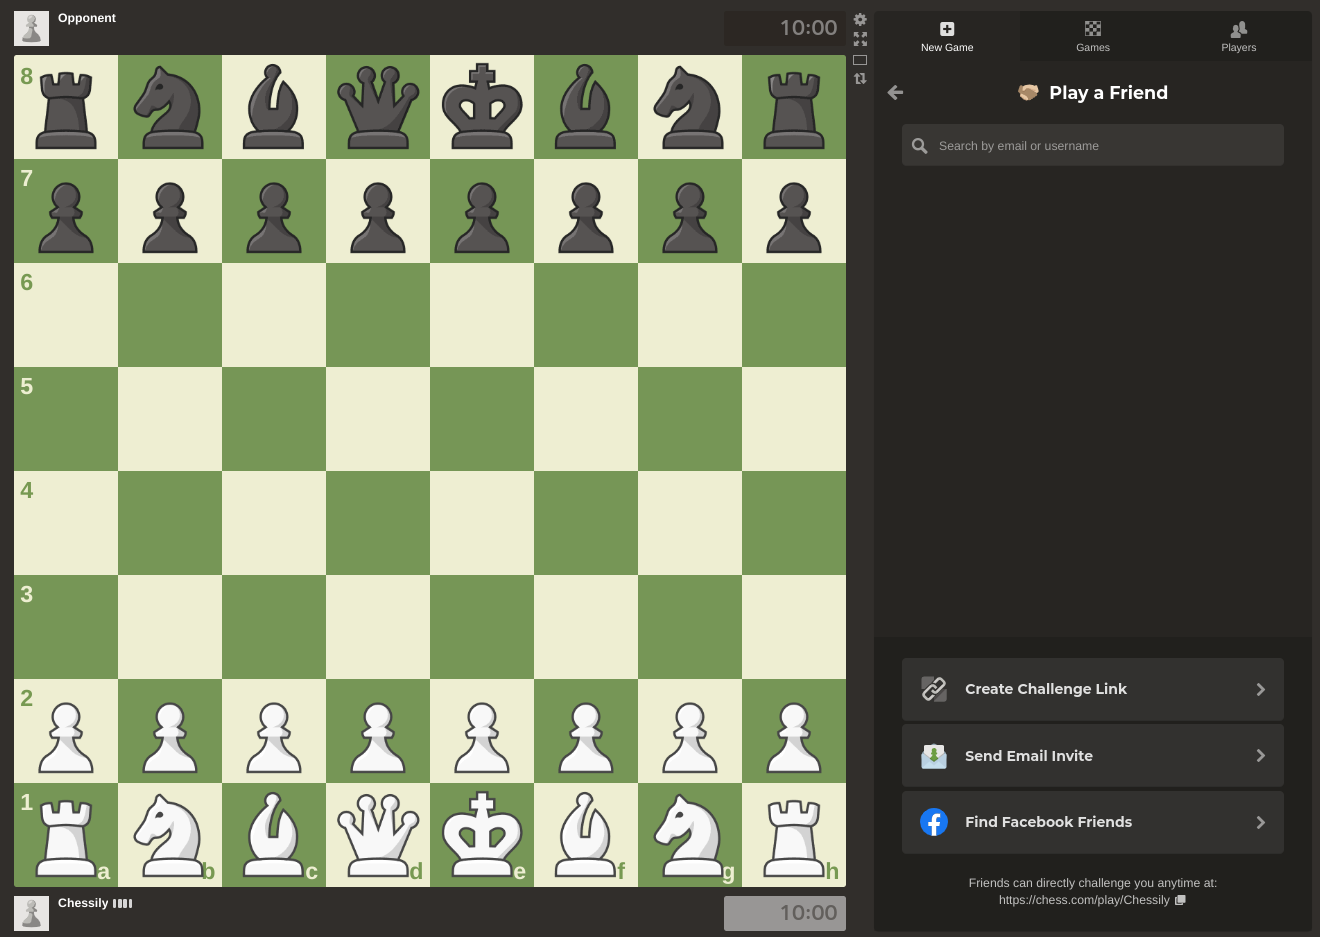 How To Play Chess Online Together With a Friend (For Free!)